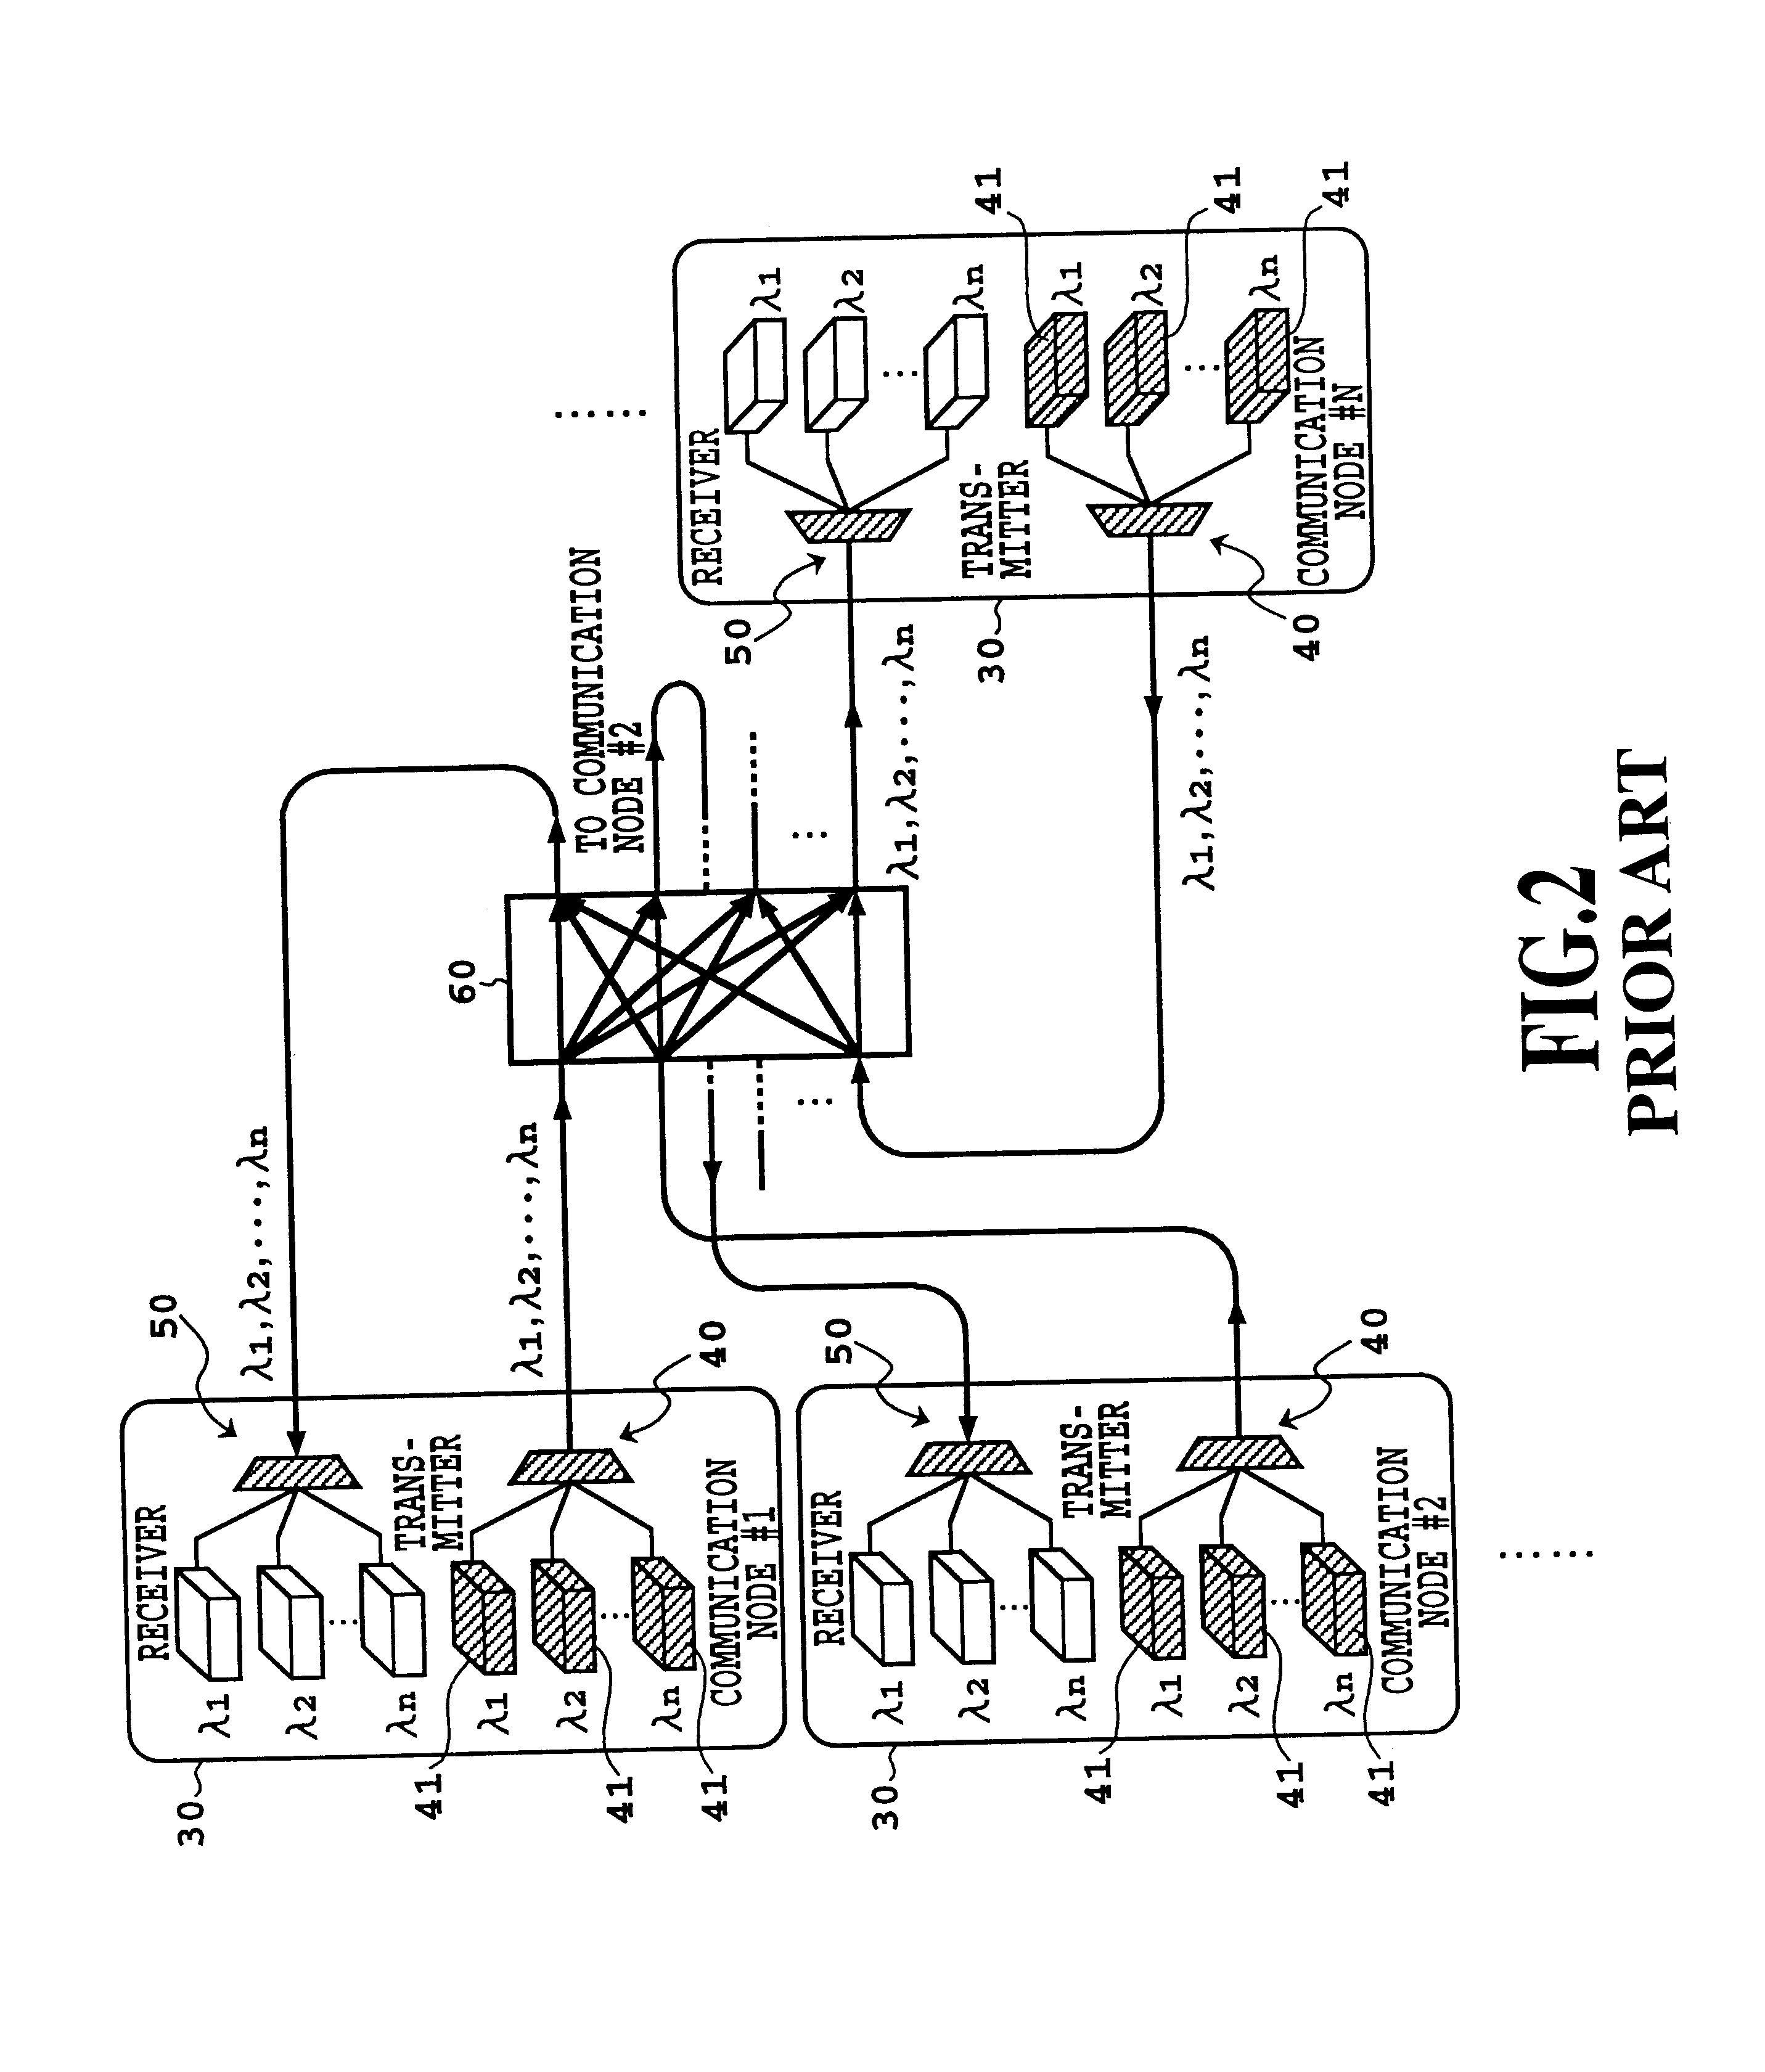 Optical packet routing network system based on optical label switching technique